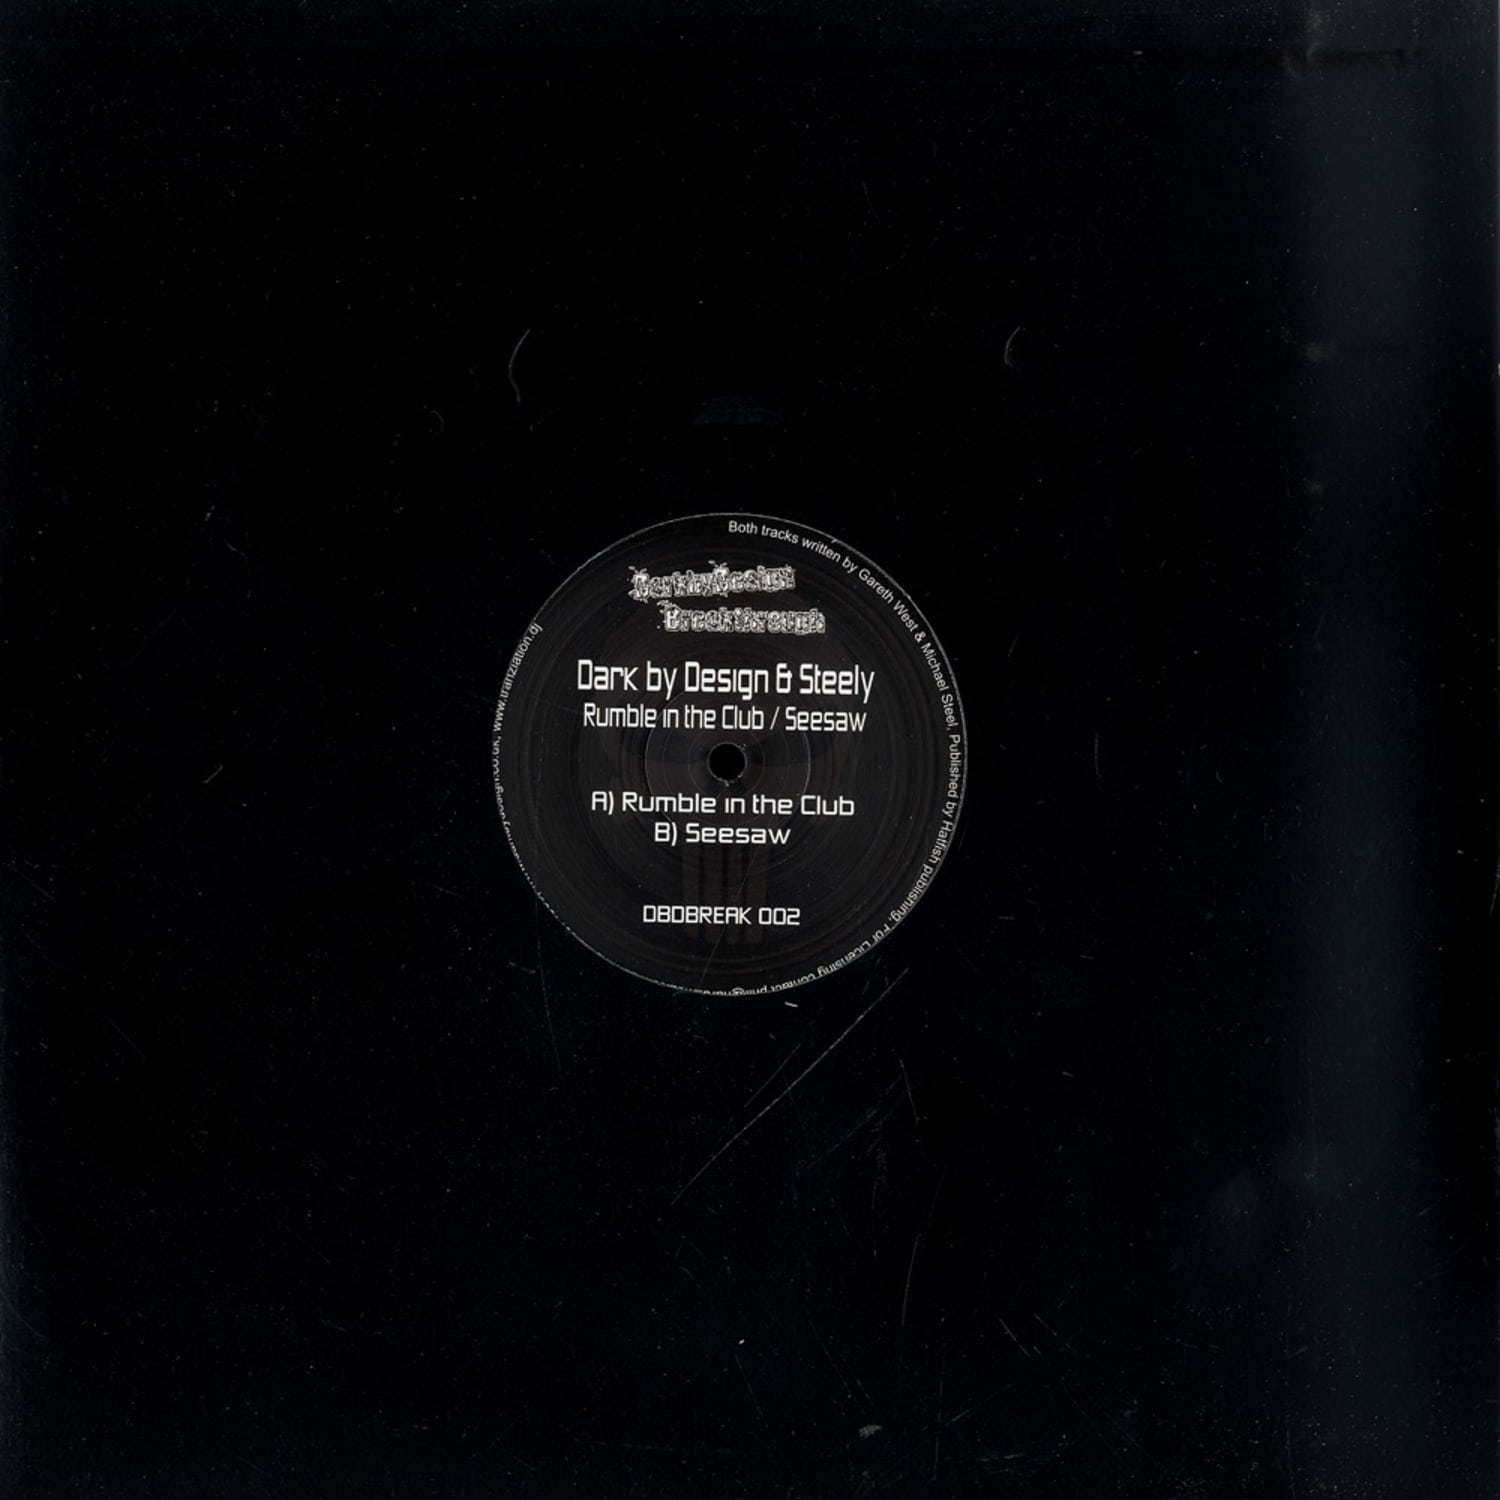 Dark By Design And Steely - RUMBLE IN THE CLUB / SEESAW